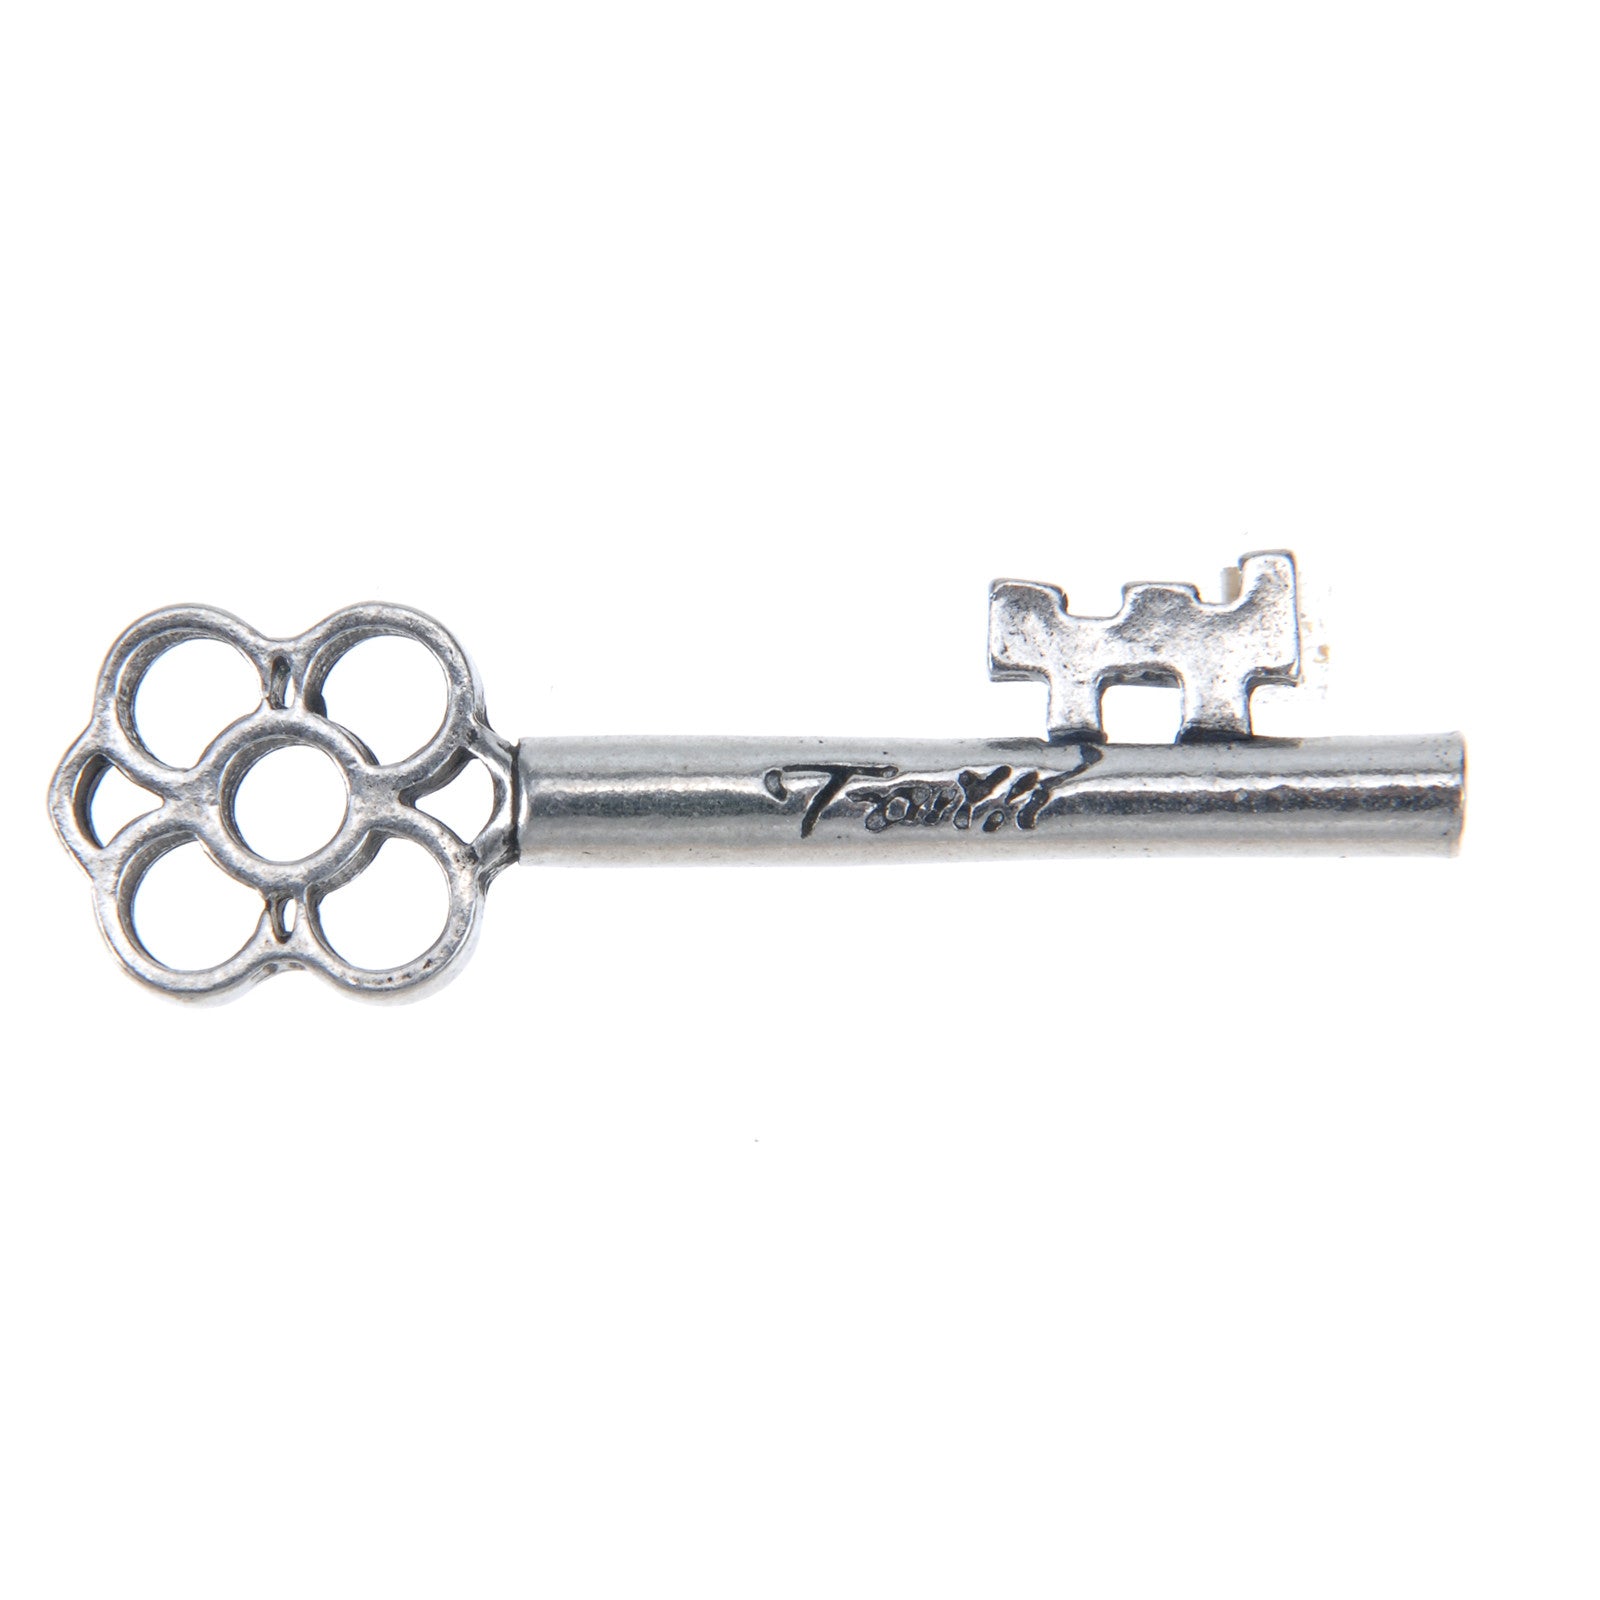 Whitney Howard Designs Faith Key Charm | Inspiring Key Charms for Necklaces & Bracelets Loose Handcrafted in Pewter